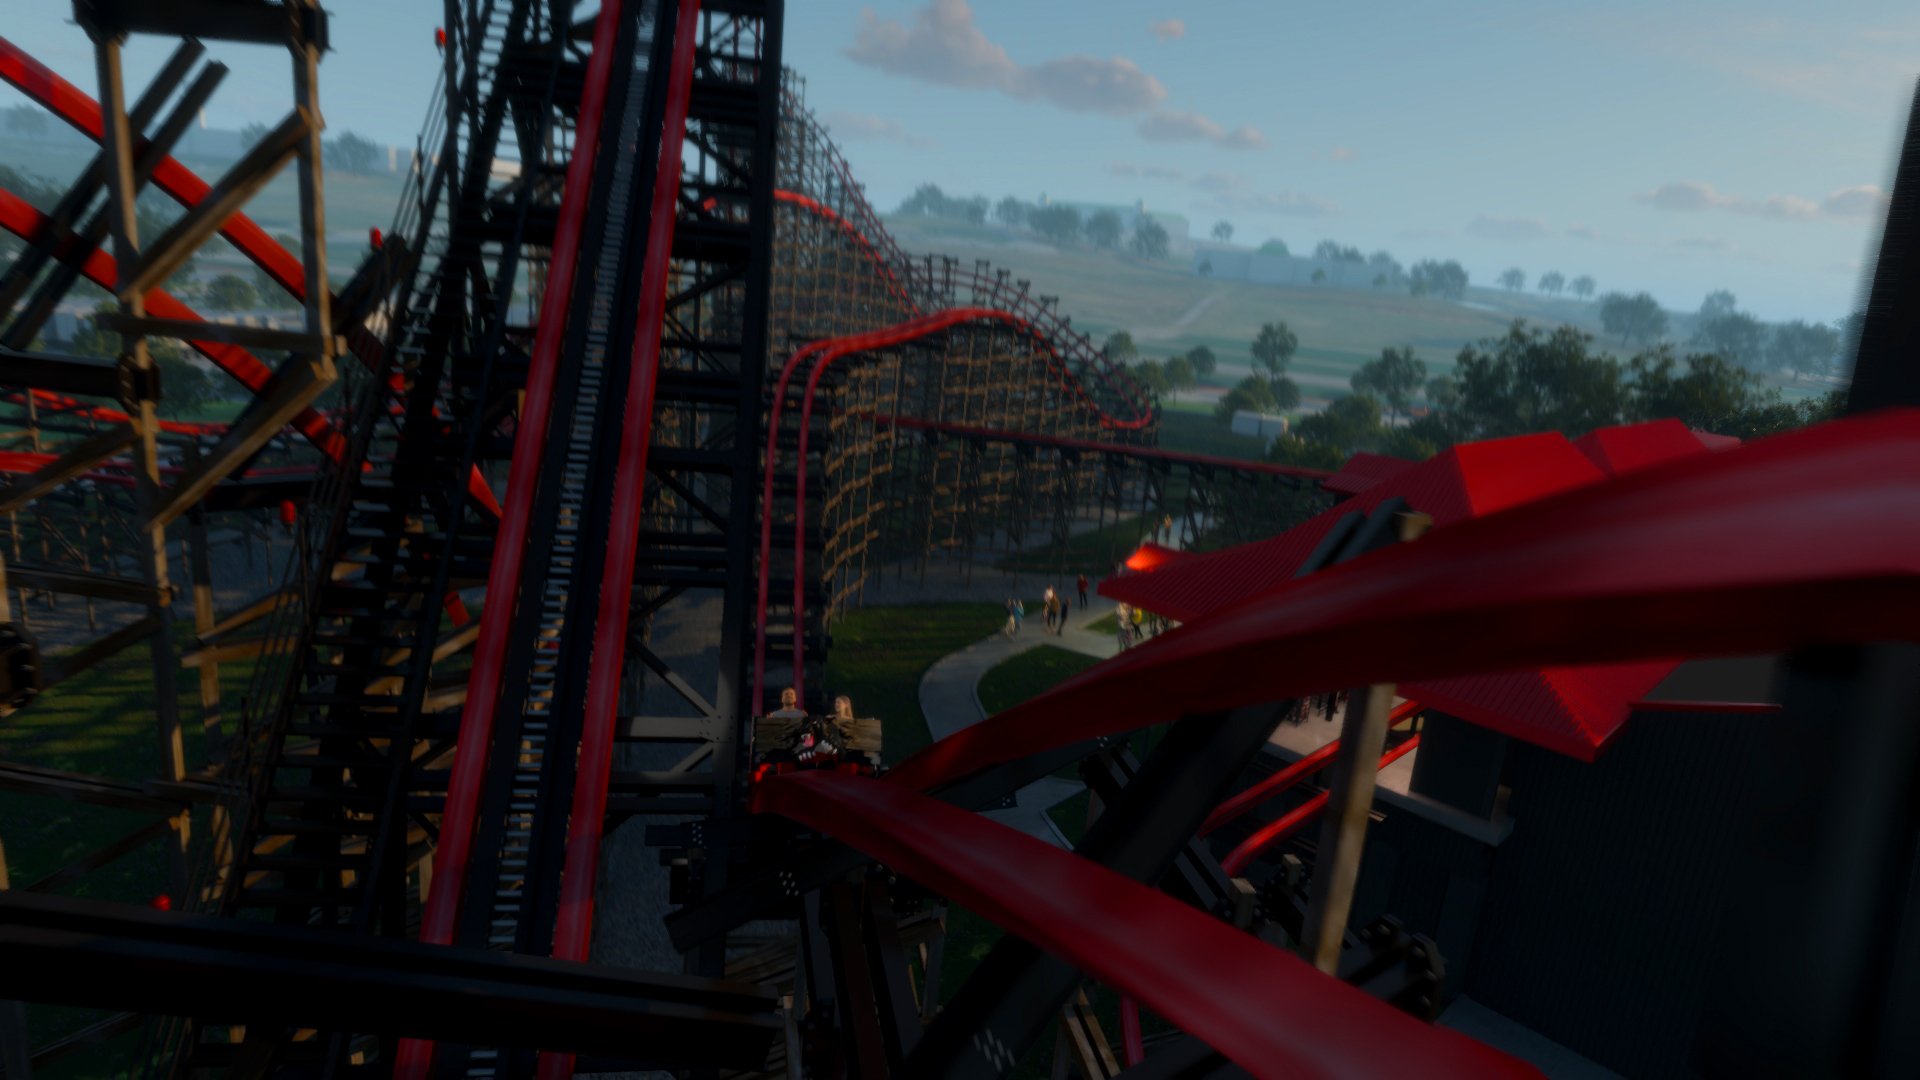 Wildcat's Revenge_Steel Track With Wood Supports.jpg